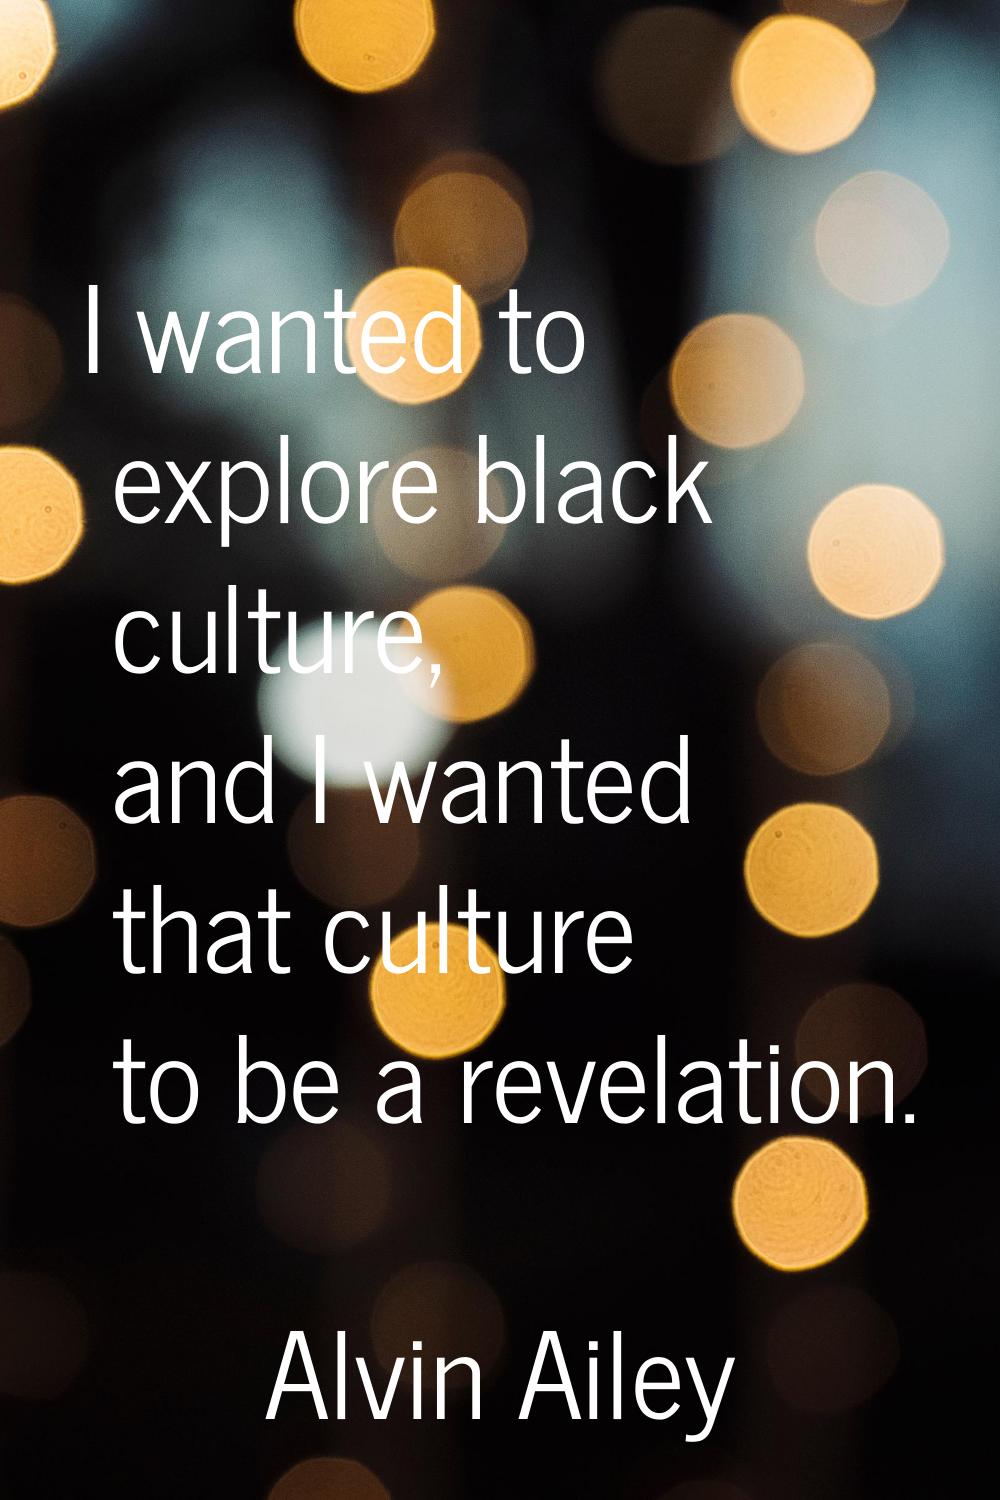 I wanted to explore black culture, and I wanted that culture to be a revelation.